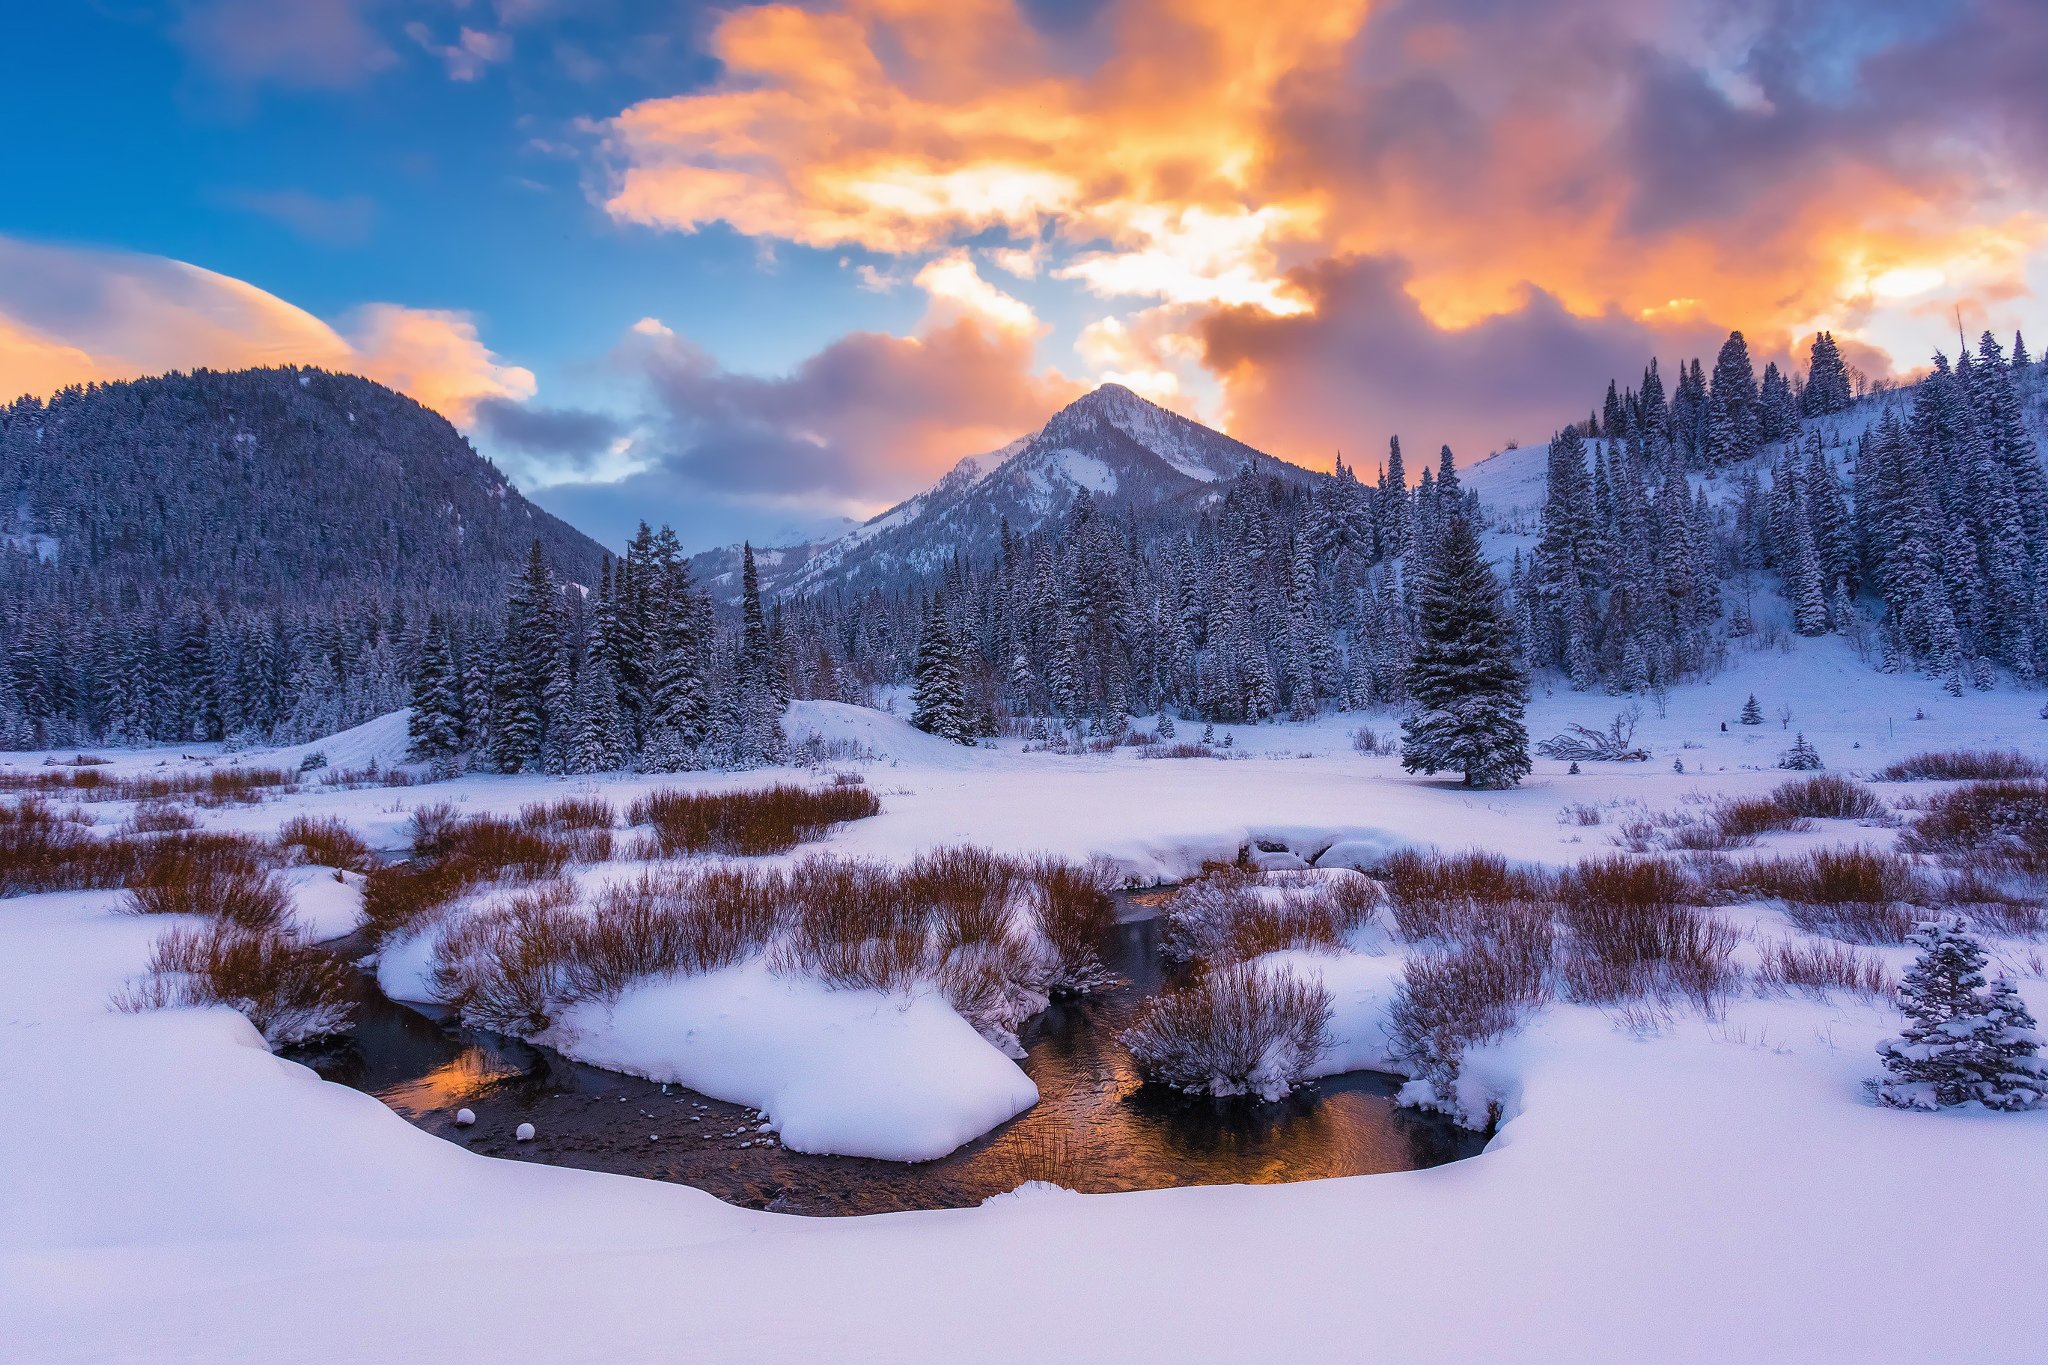  utah mountains winter snow stream wallpapers landscapes   download 2048x1365